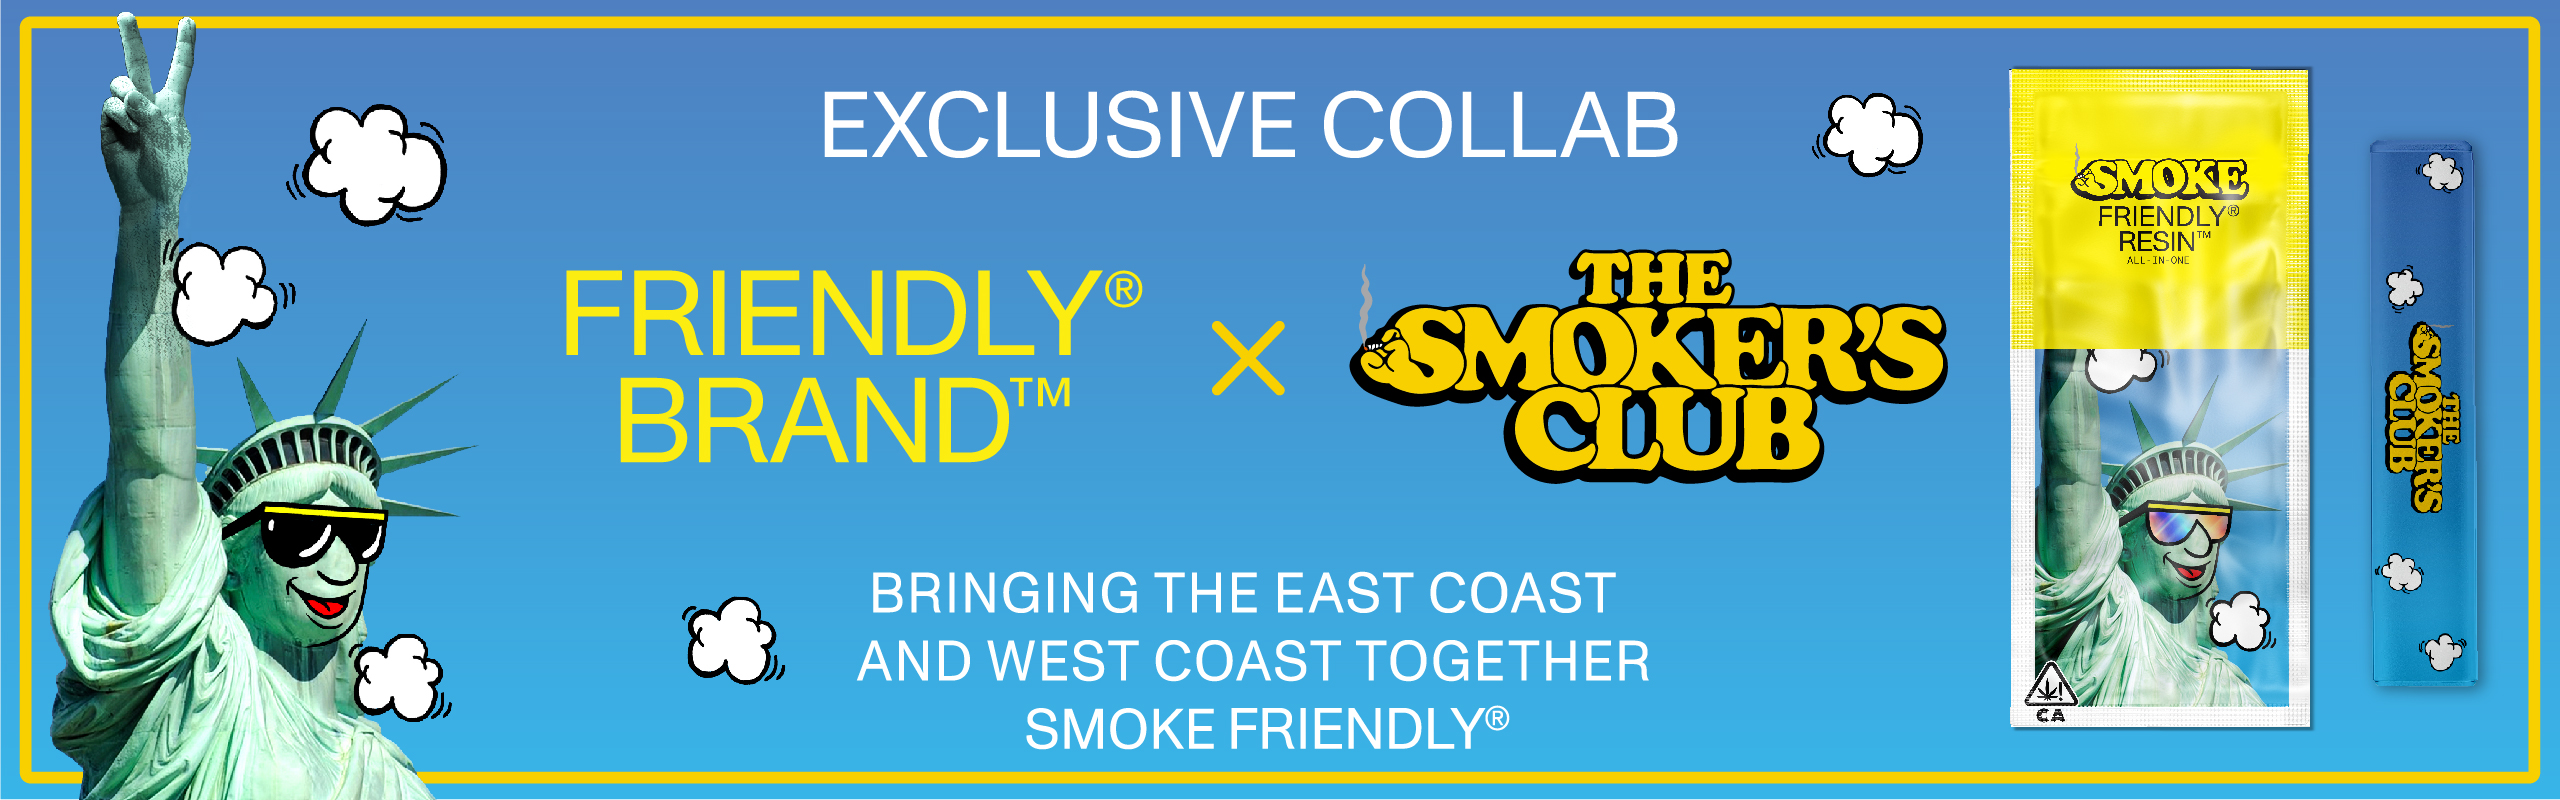 FRIENDLY BRAND AND THE SMOKER'S CLUB COLLAB